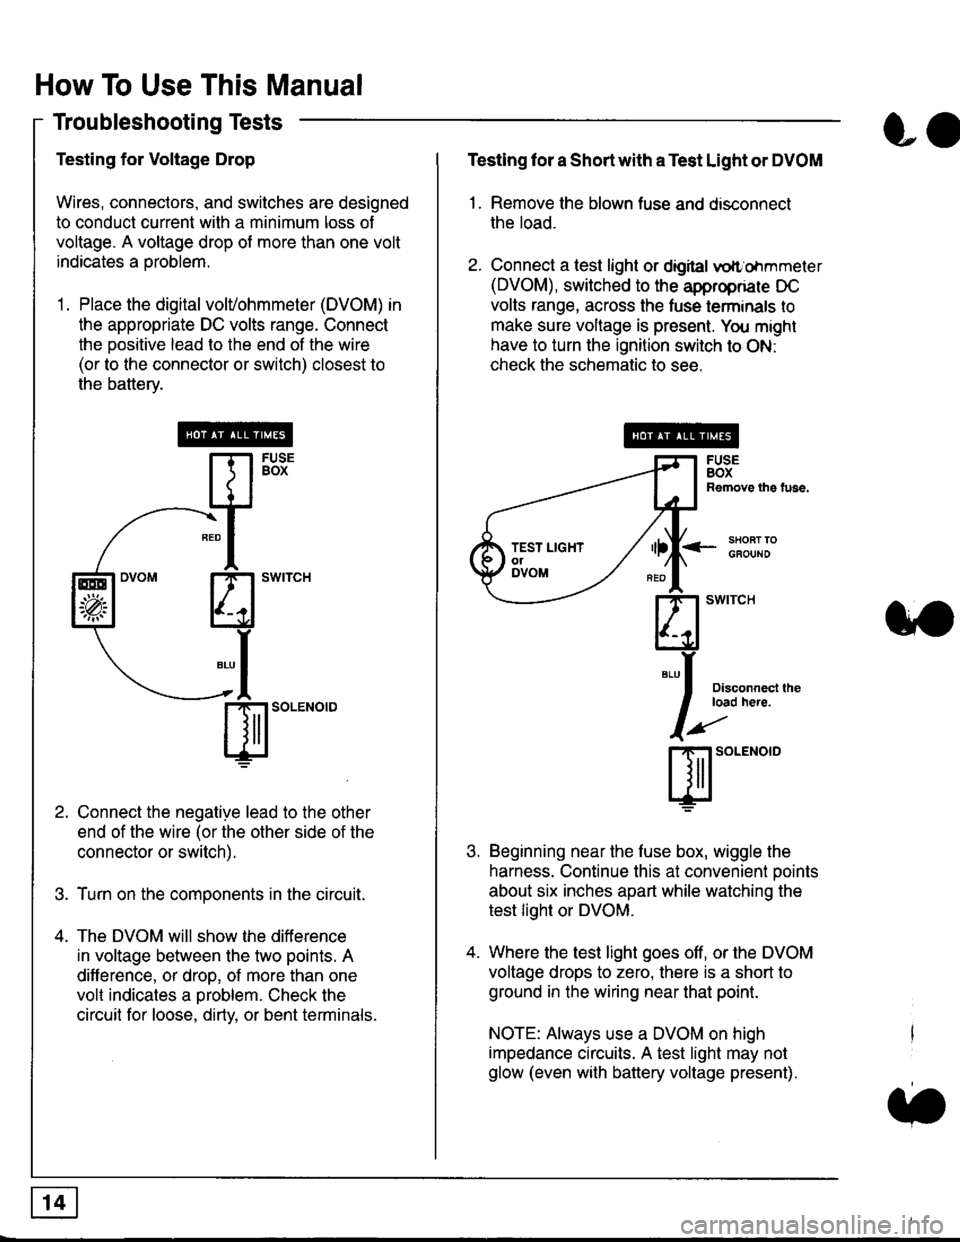 HONDA CIVIC 1997 6.G User Guide How To Use This Manual
Troubleshooting Tests
Testing for Voltage Drop
Wires, connectors, and switches are designed
to conduct current wilh a minimum loss of
voltage. A voltage drop of more than one vo